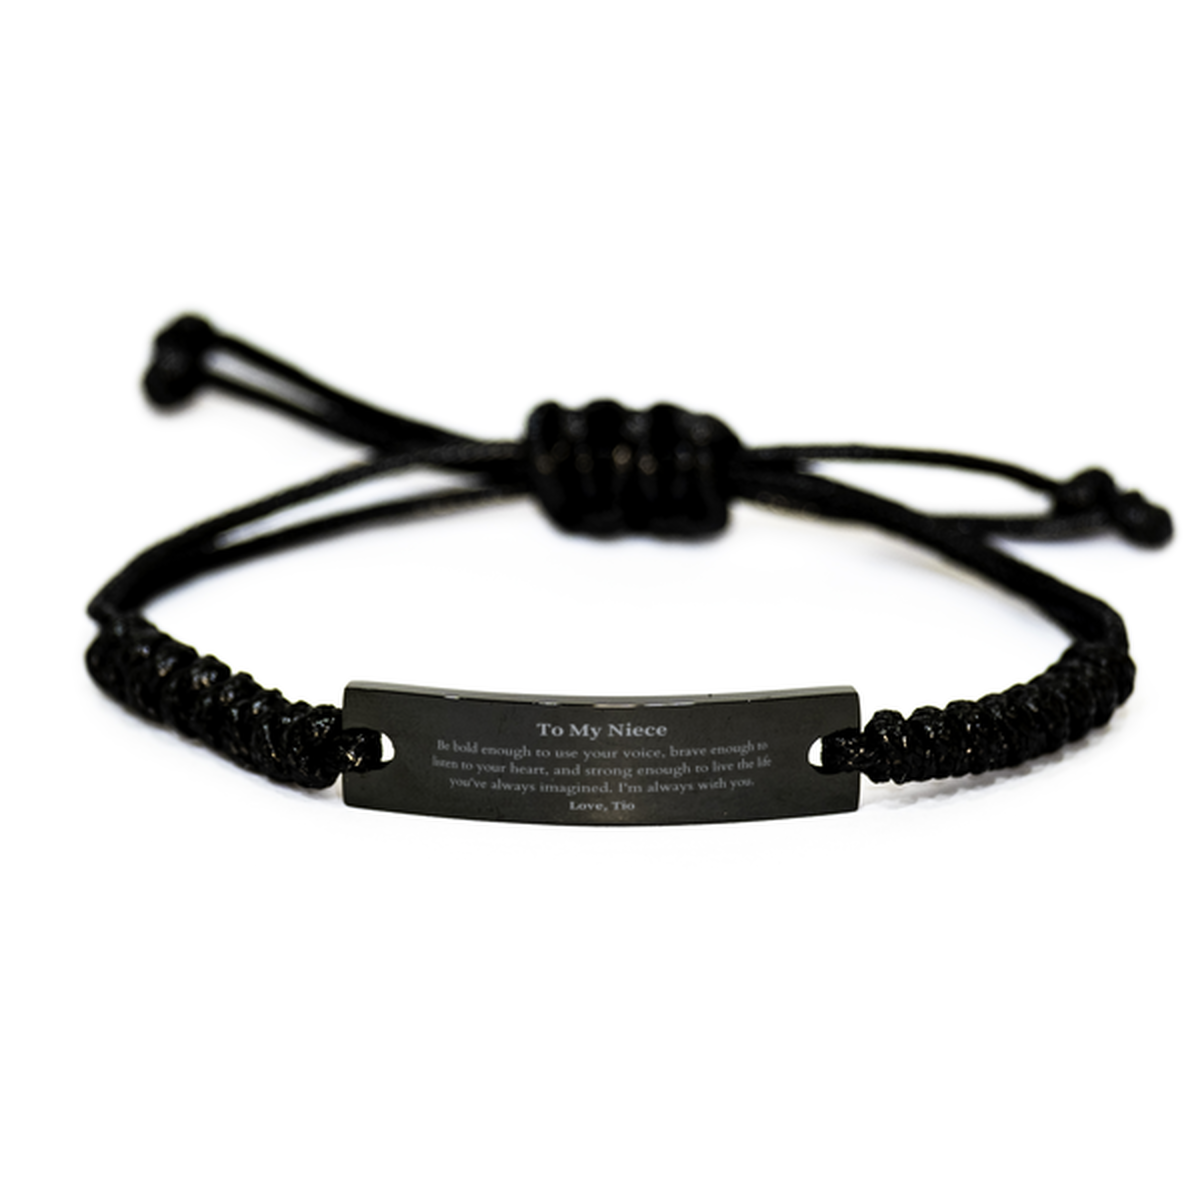 Keepsake Niece Black Rope Bracelet Gift Idea Graduation Christmas Birthday Niece from Tio, Niece Be bold enough to use your voice, brave enough to listen to your heart. Love, Tio